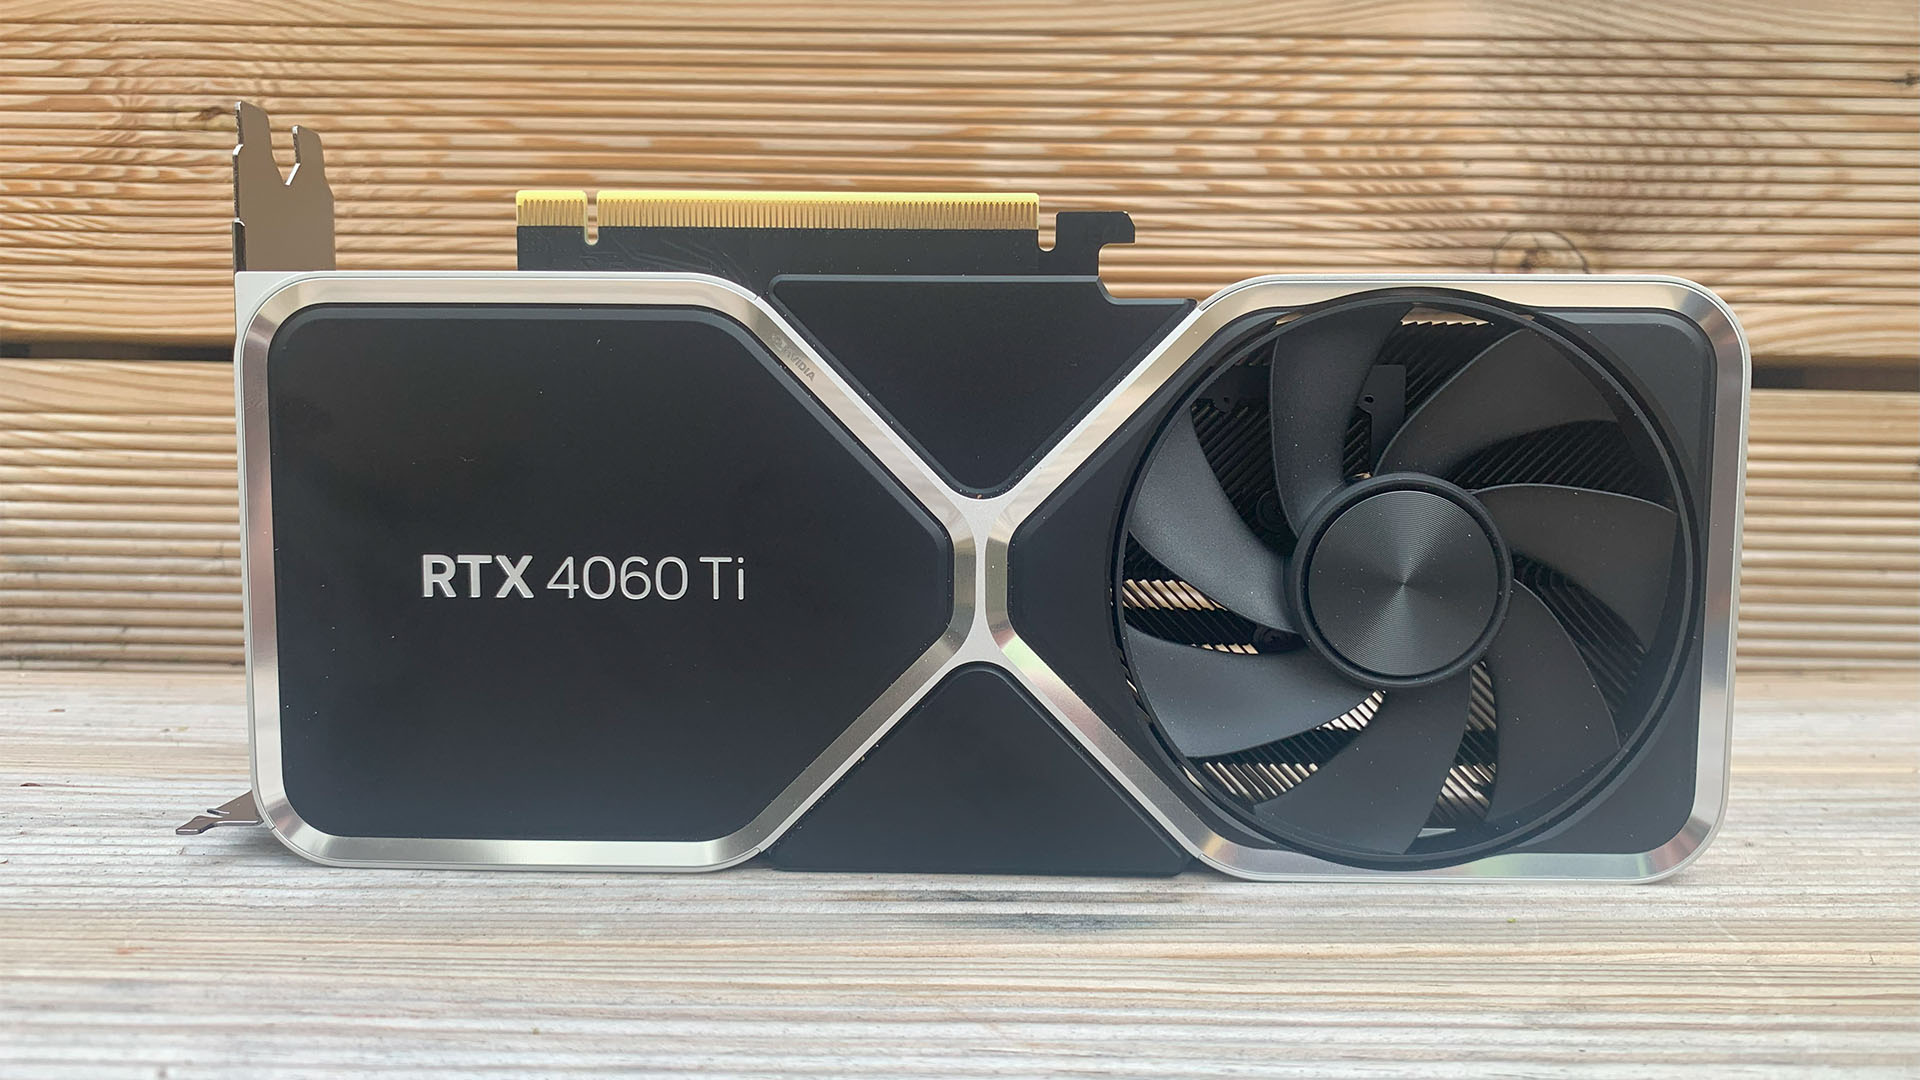 NVIDIA GeForce RTX 4060 Ti Founders Edition 8GB Graphics Card